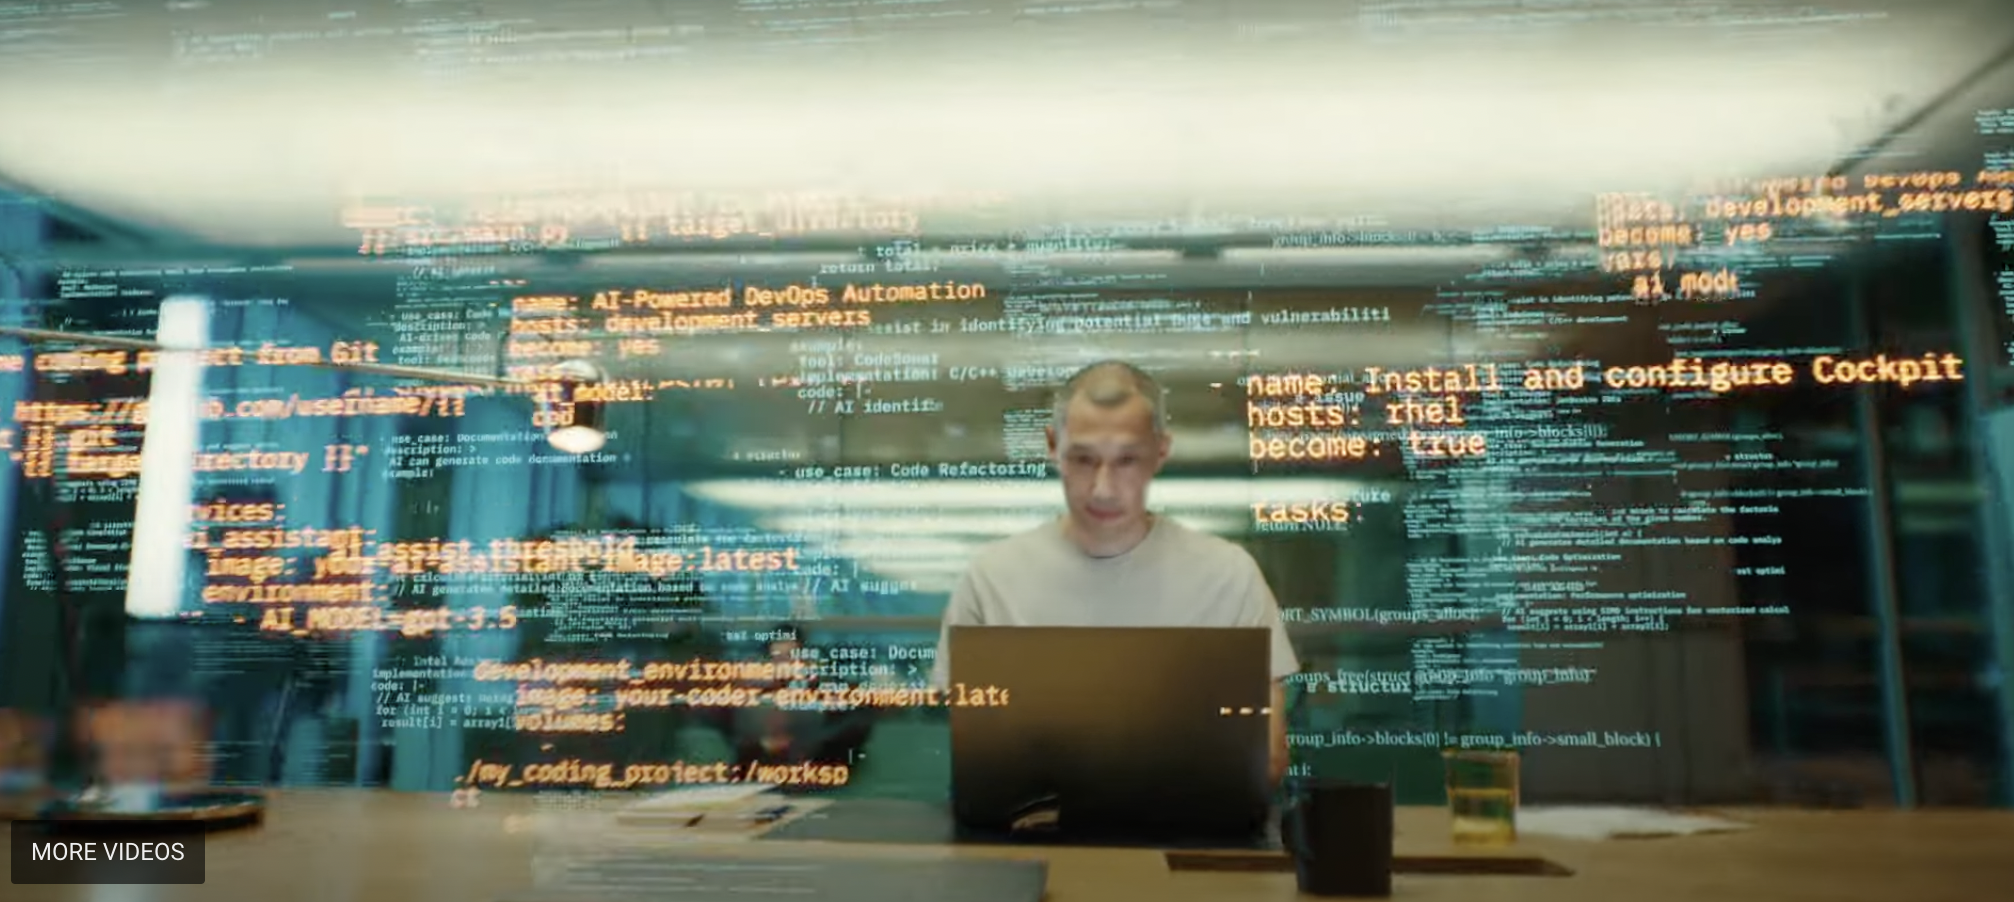 A flurry of data appears superimposed around a man working on a computer.